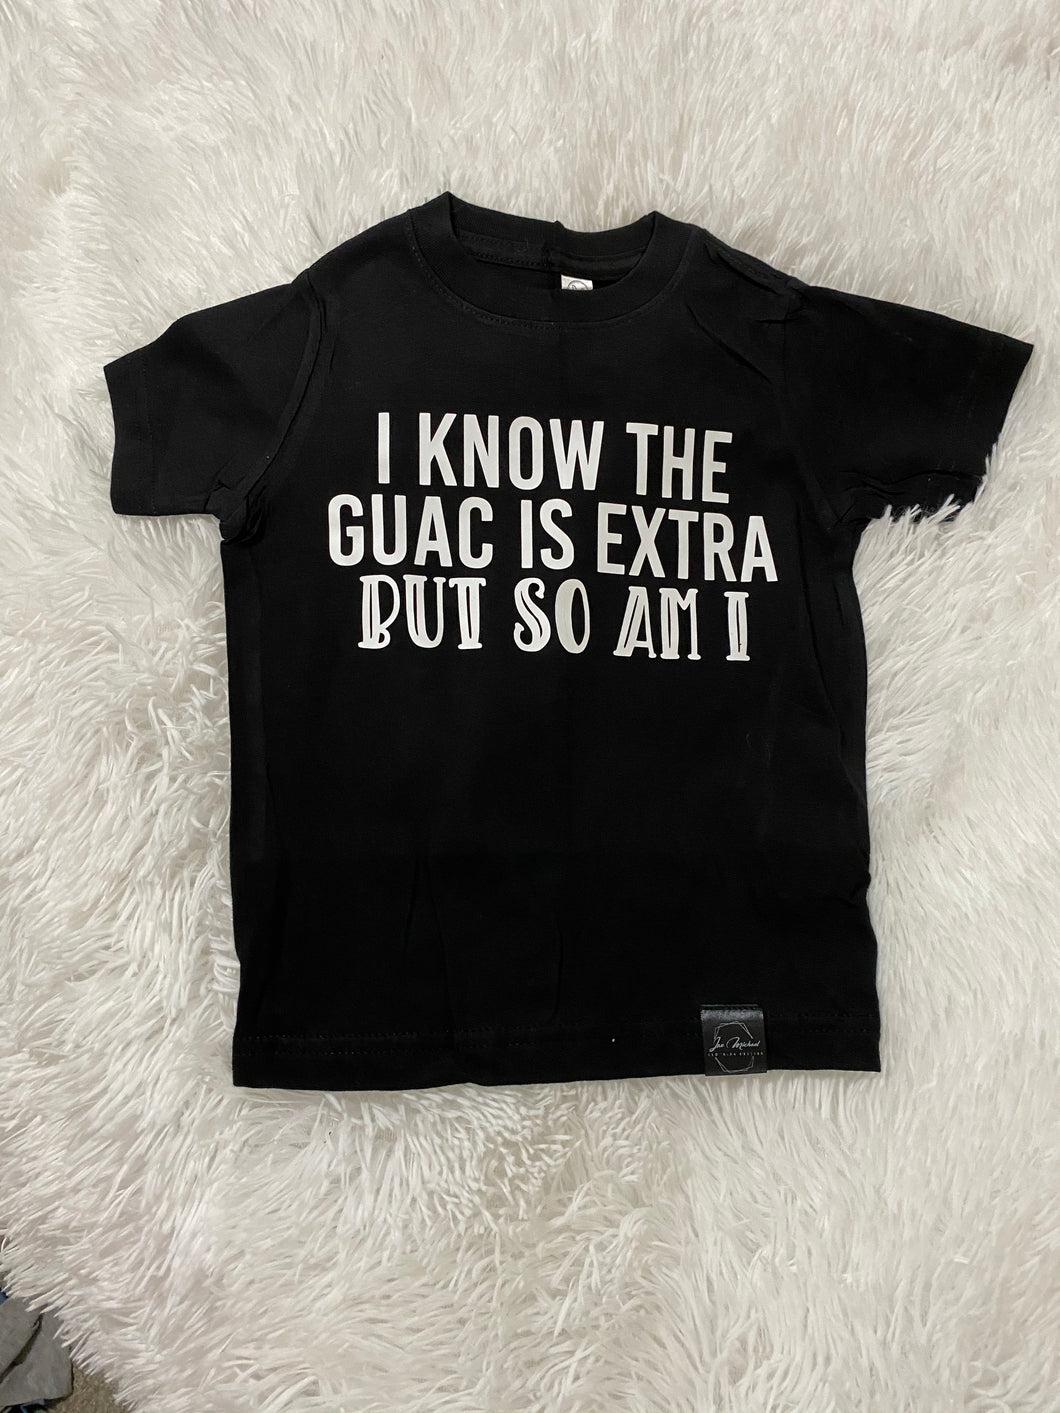 Guac is Extra